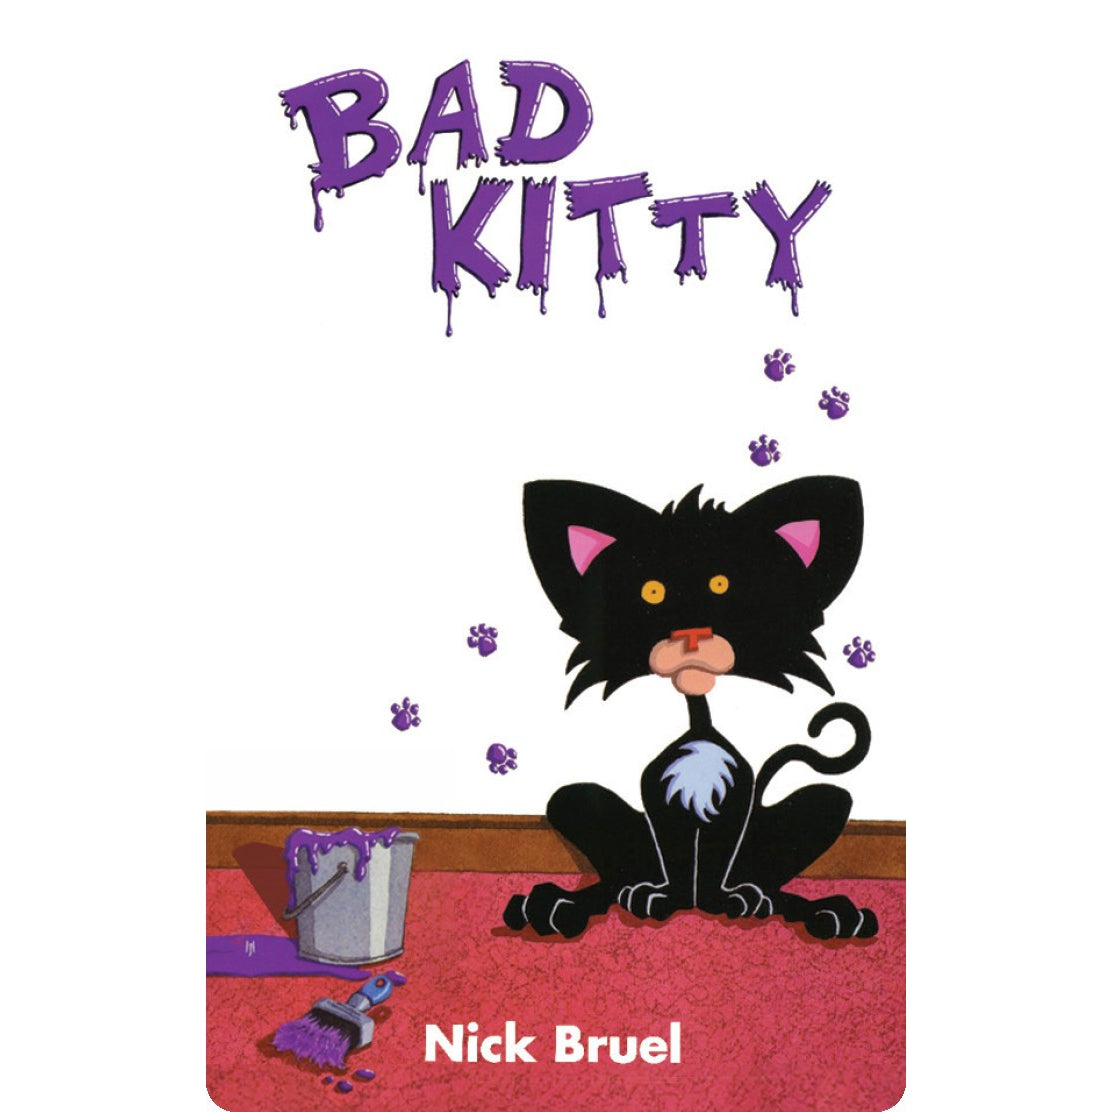 Yoto Card - Bad Kitty - Child Friendly Audio Story Card for the Yoto Player